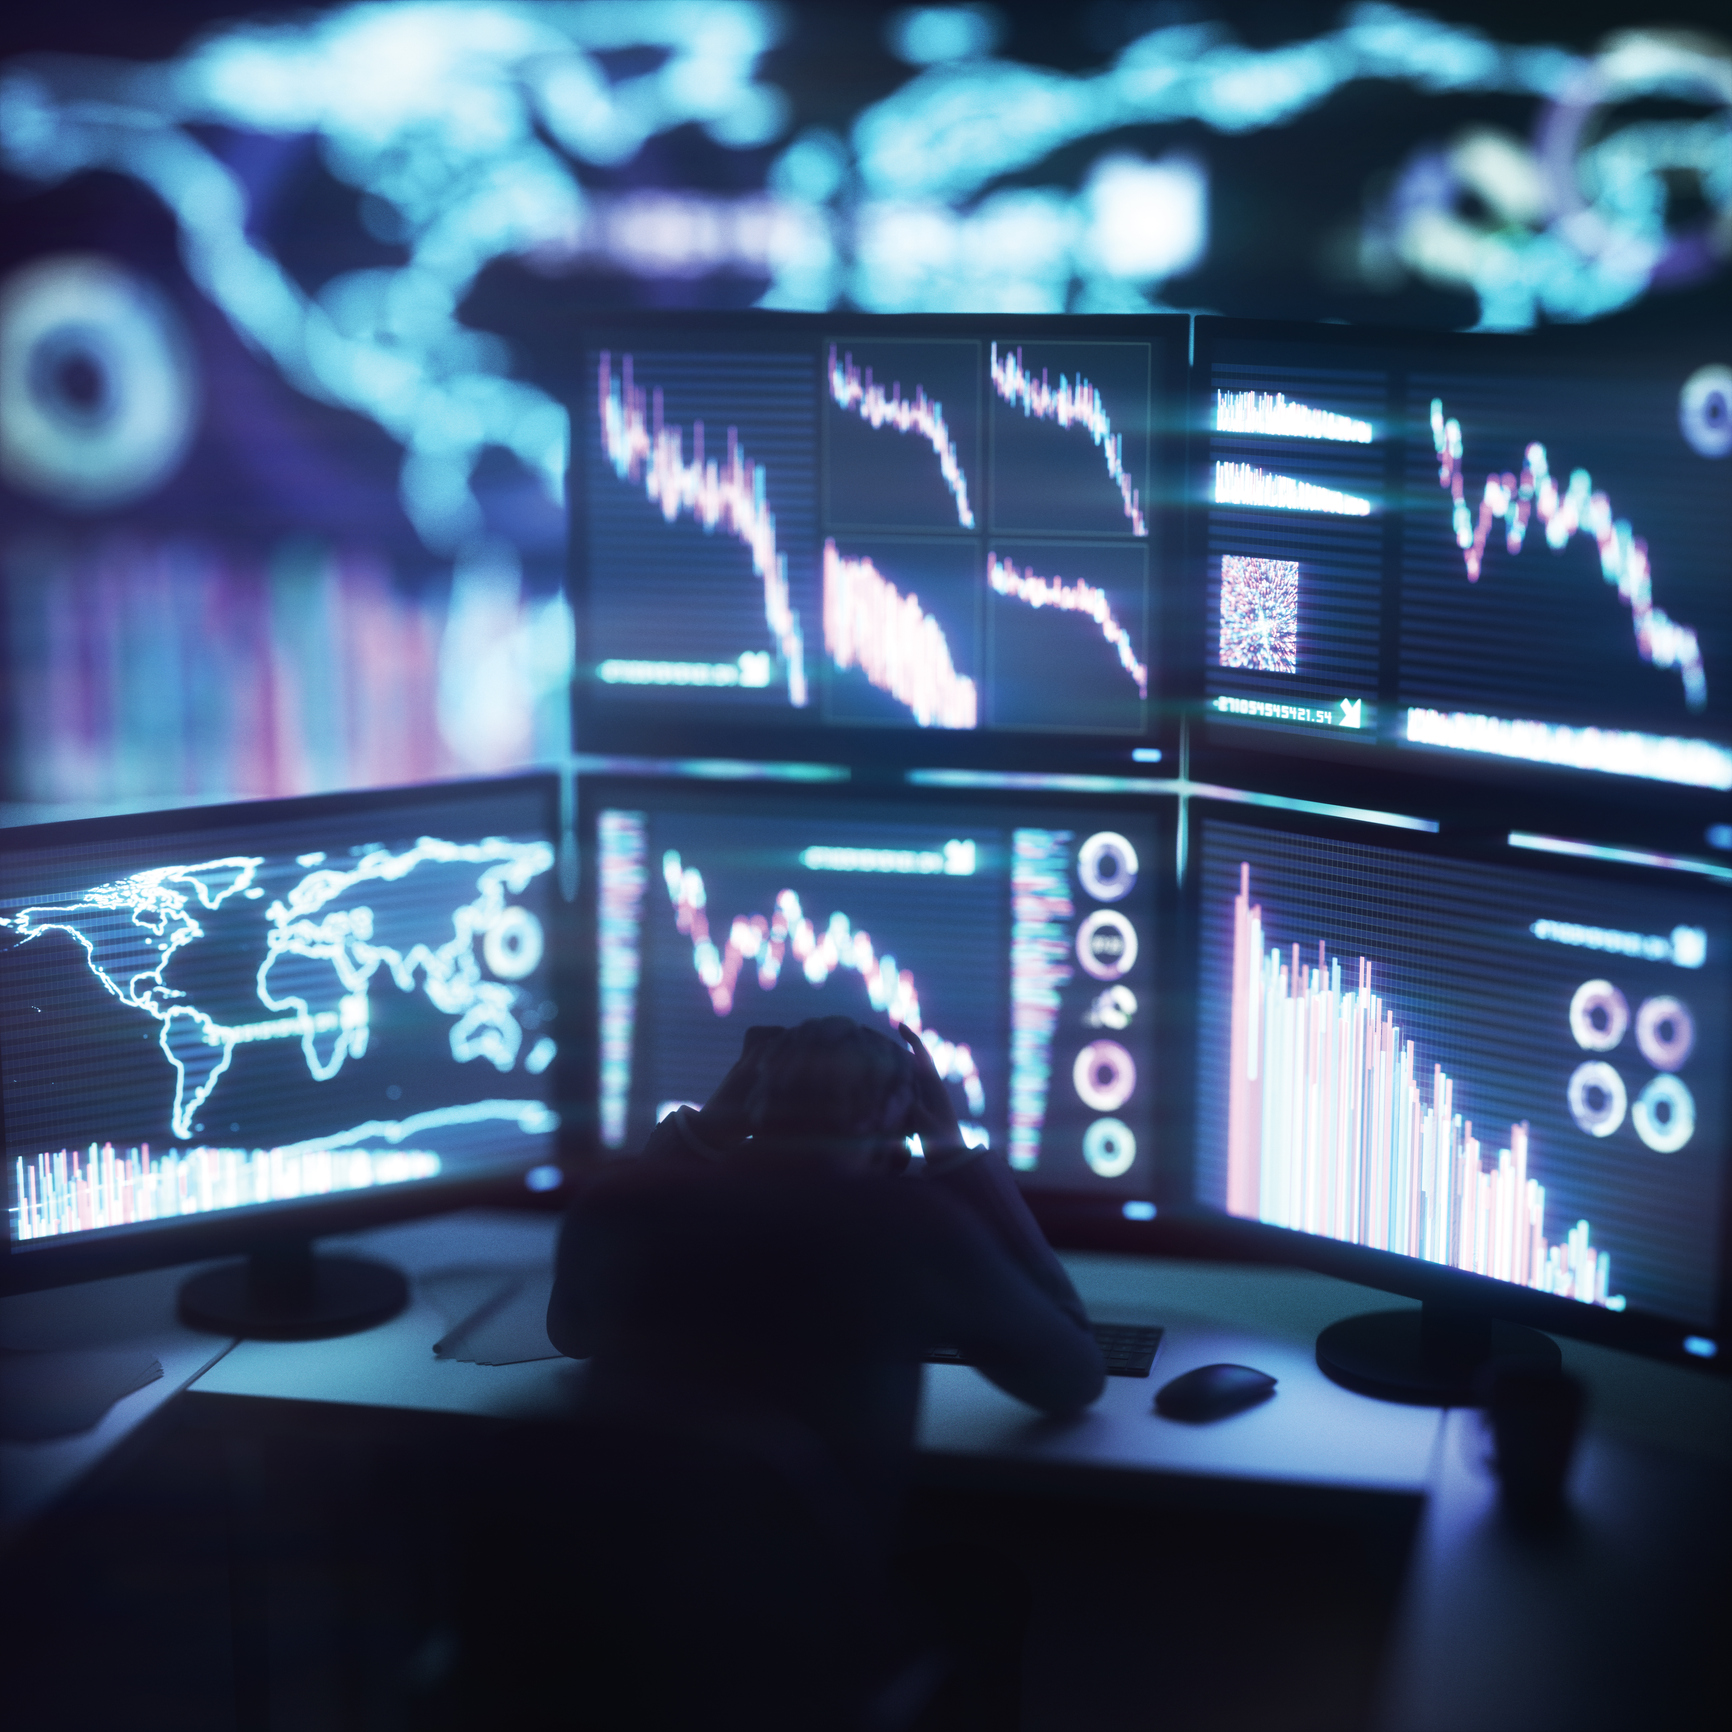 Illustration of man watching on monitors showing falling stock markets. Computer generated image.